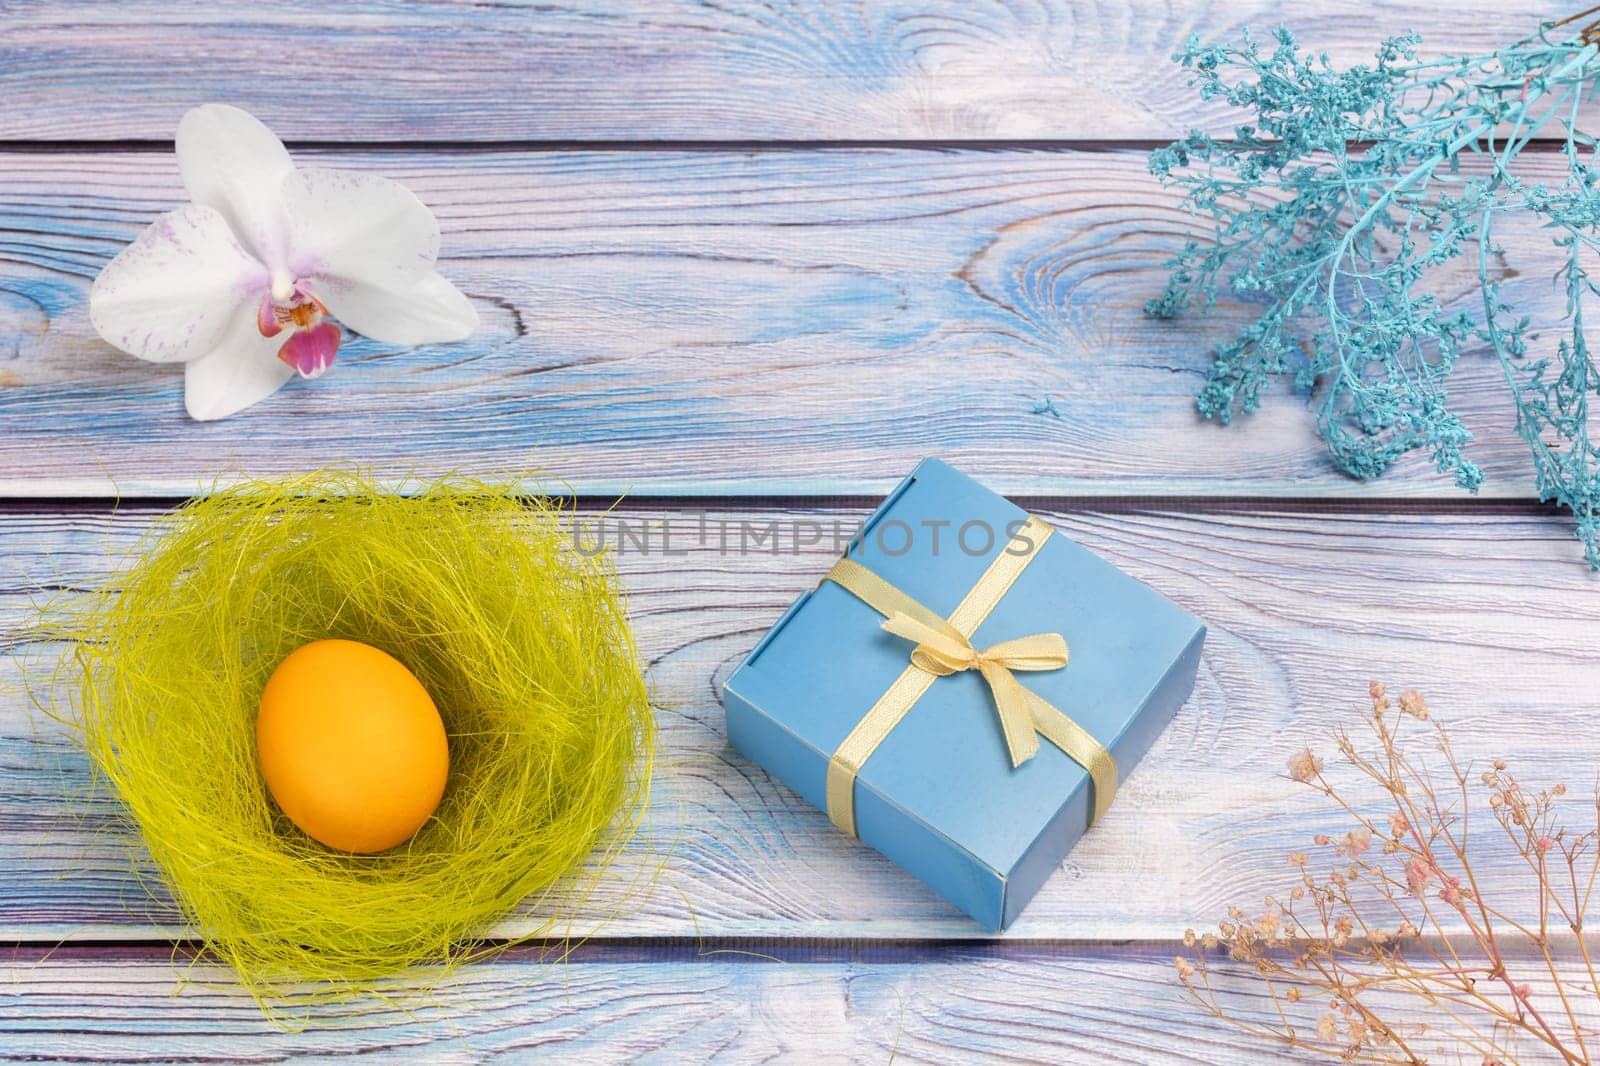 Nest with Easter egg and a gift box on the wooden background. by mvg6894